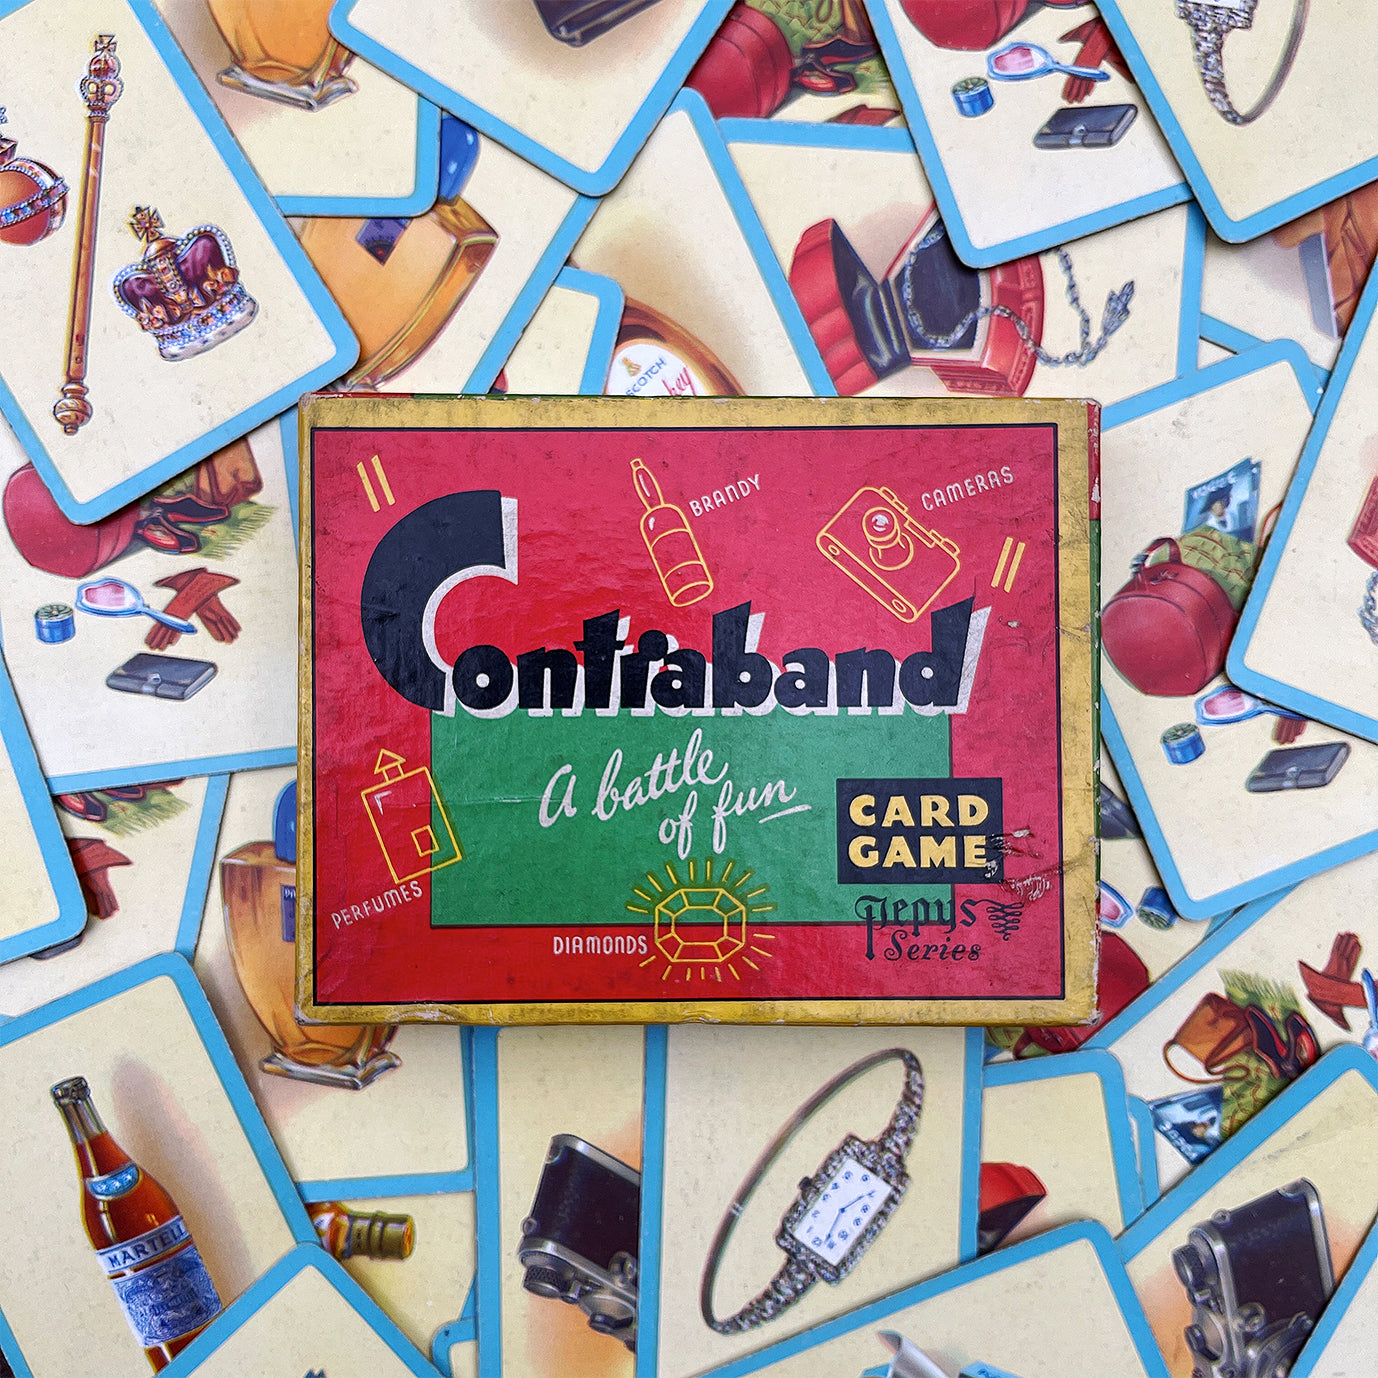 Contraband - Vintage Pepys illustrated card game from the 1940's - - SHOP NOW - www.intovintage.co.uk